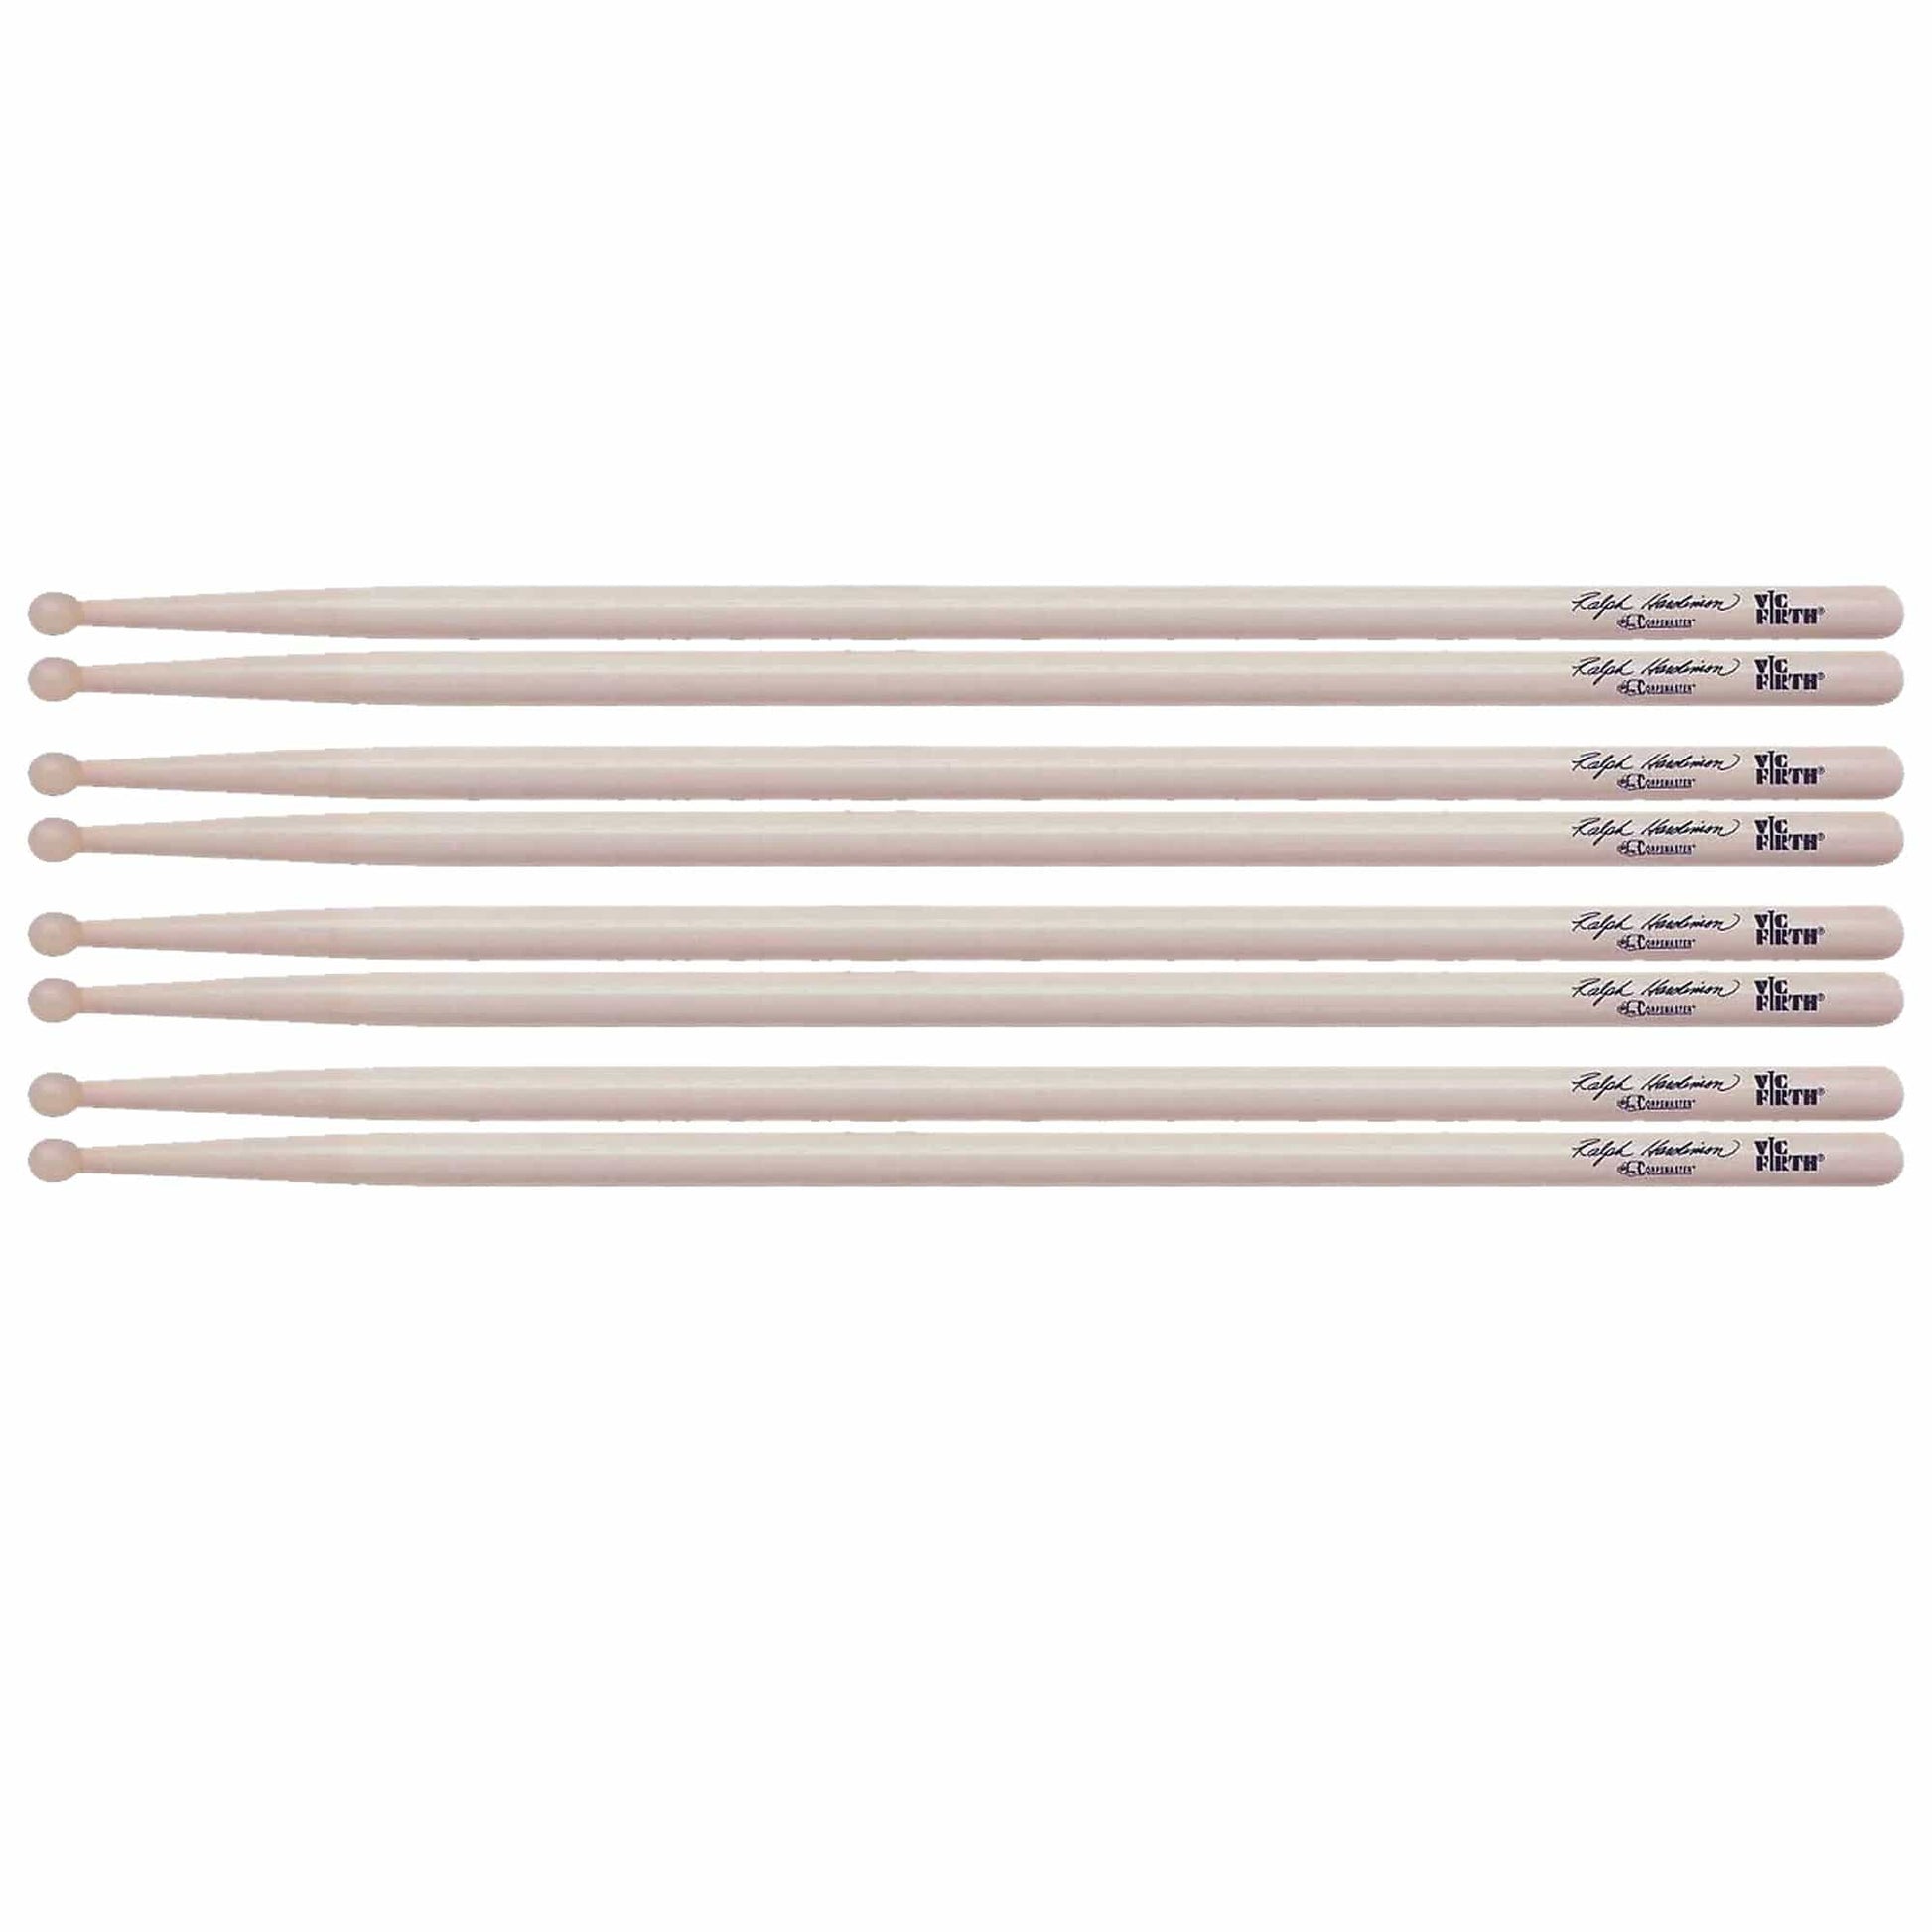 Vic Firth Ralph Hardimon Corpmaster Wood Tip Drum Sticks (4 Pair Bundle) Drums and Percussion / Parts and Accessories / Drum Sticks and Mallets